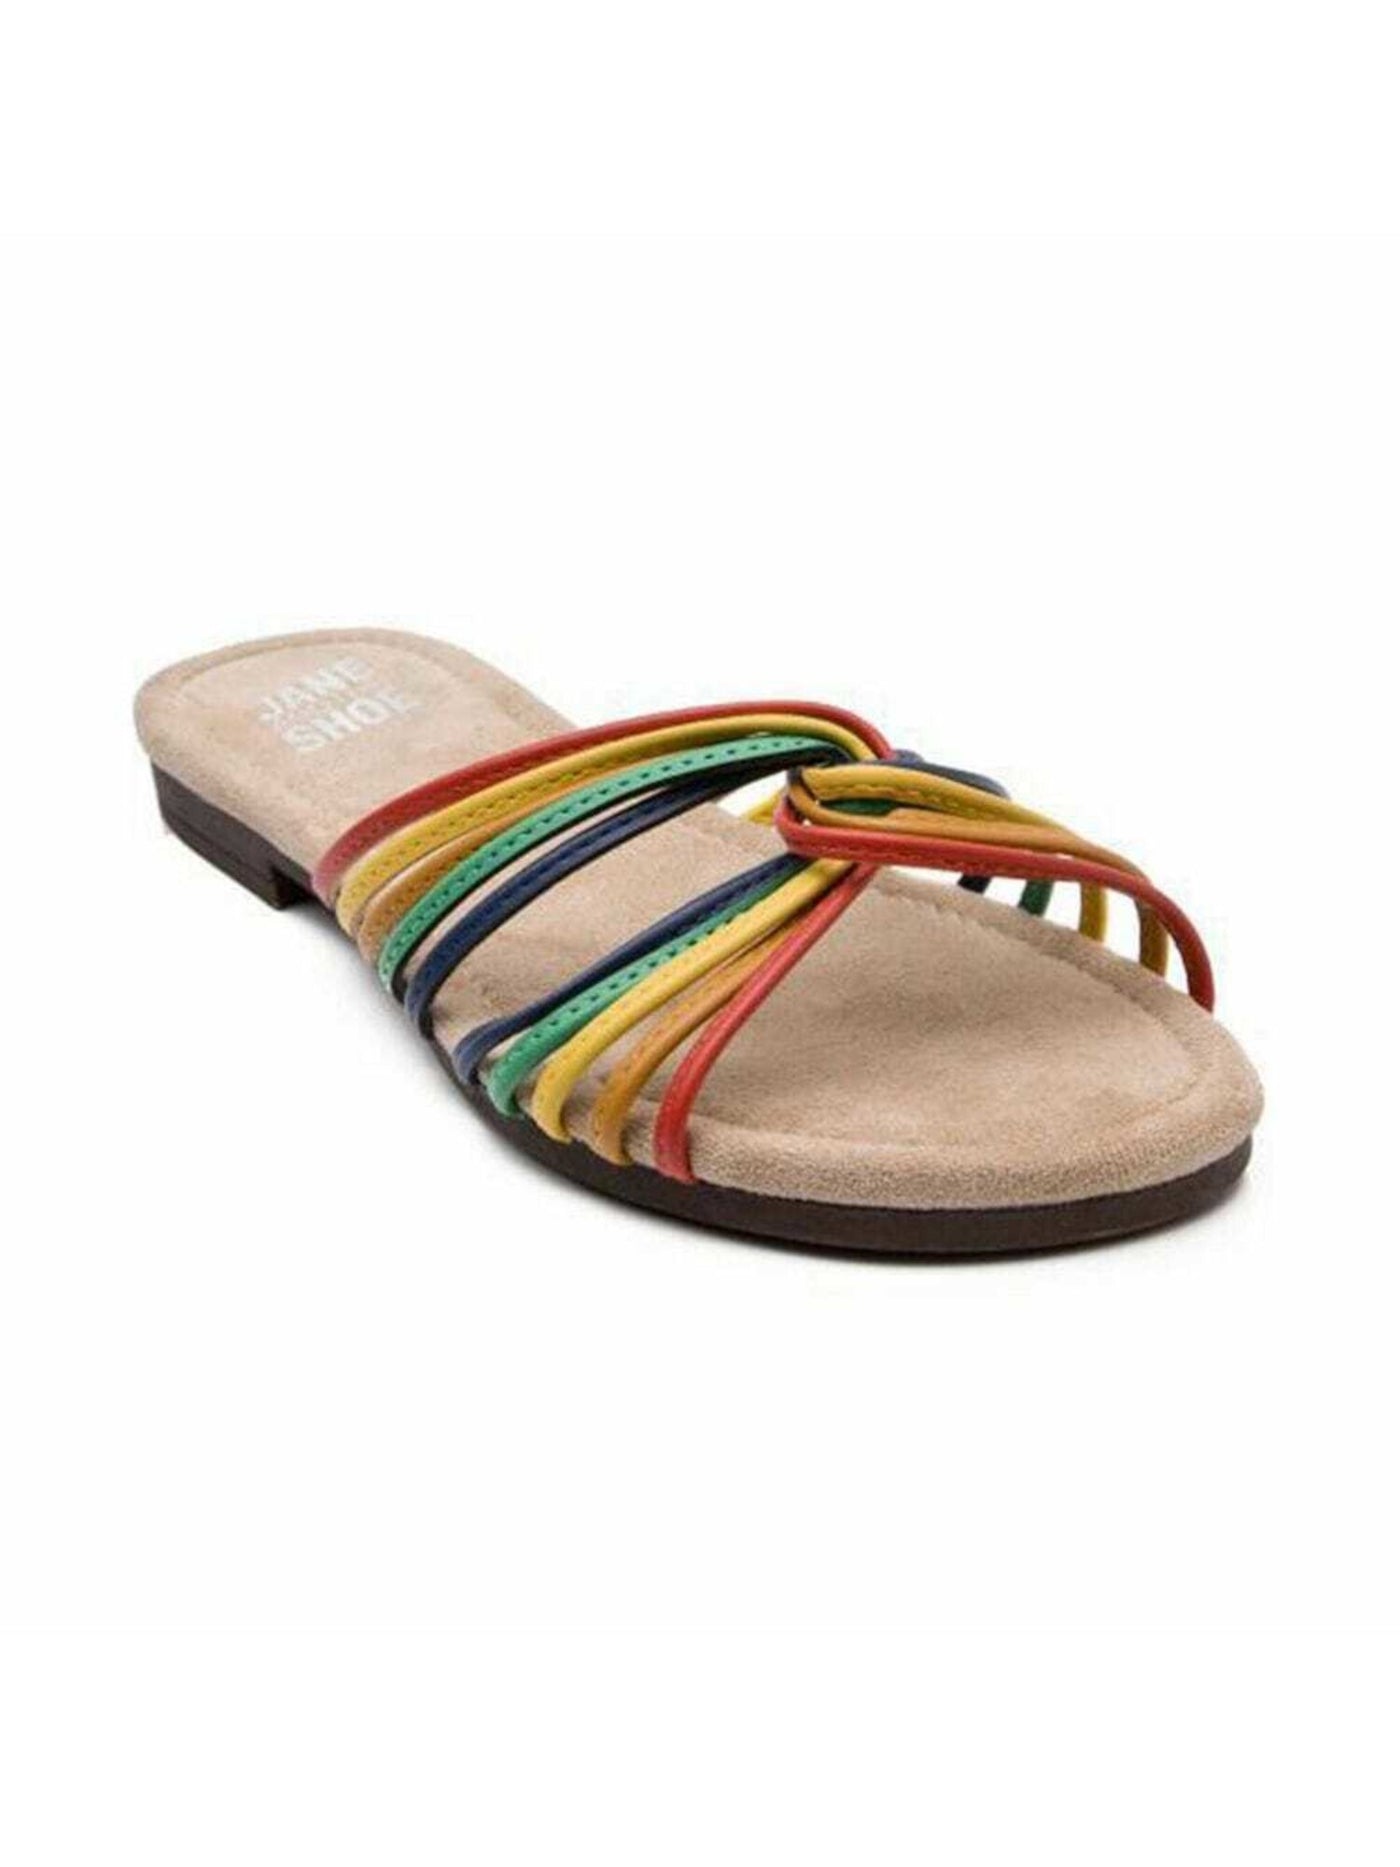 JANE AND THE SHOE Womens Beige Rainbow Cushioned Strappy Hallie Open Toe Slip On Slide Sandals Shoes 6.5